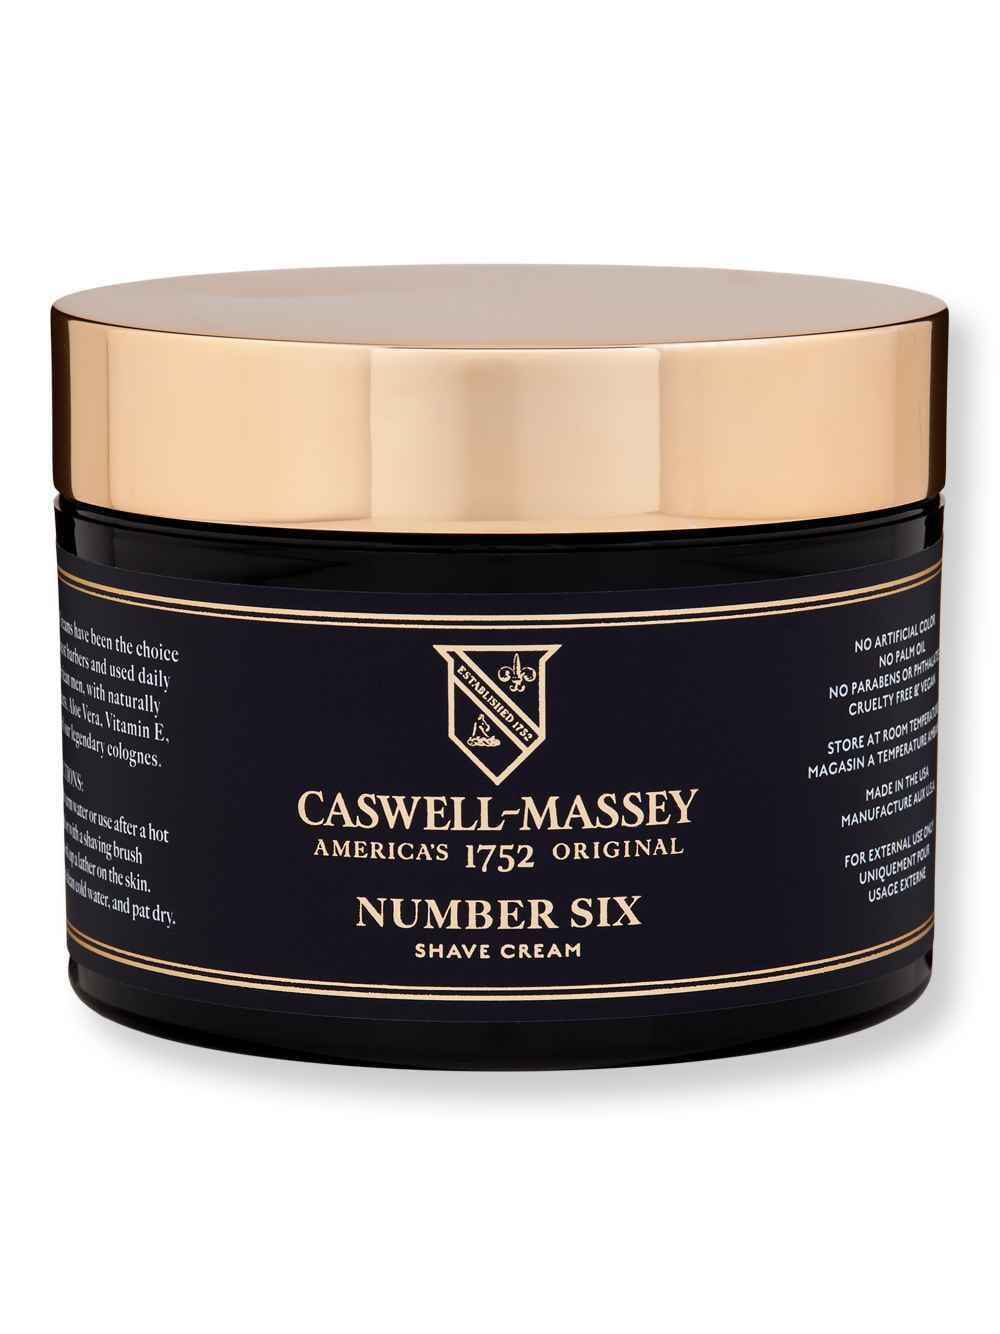 Caswell Massey Caswell Massey Number Six Shave Cream 8 oz Bar Soaps 